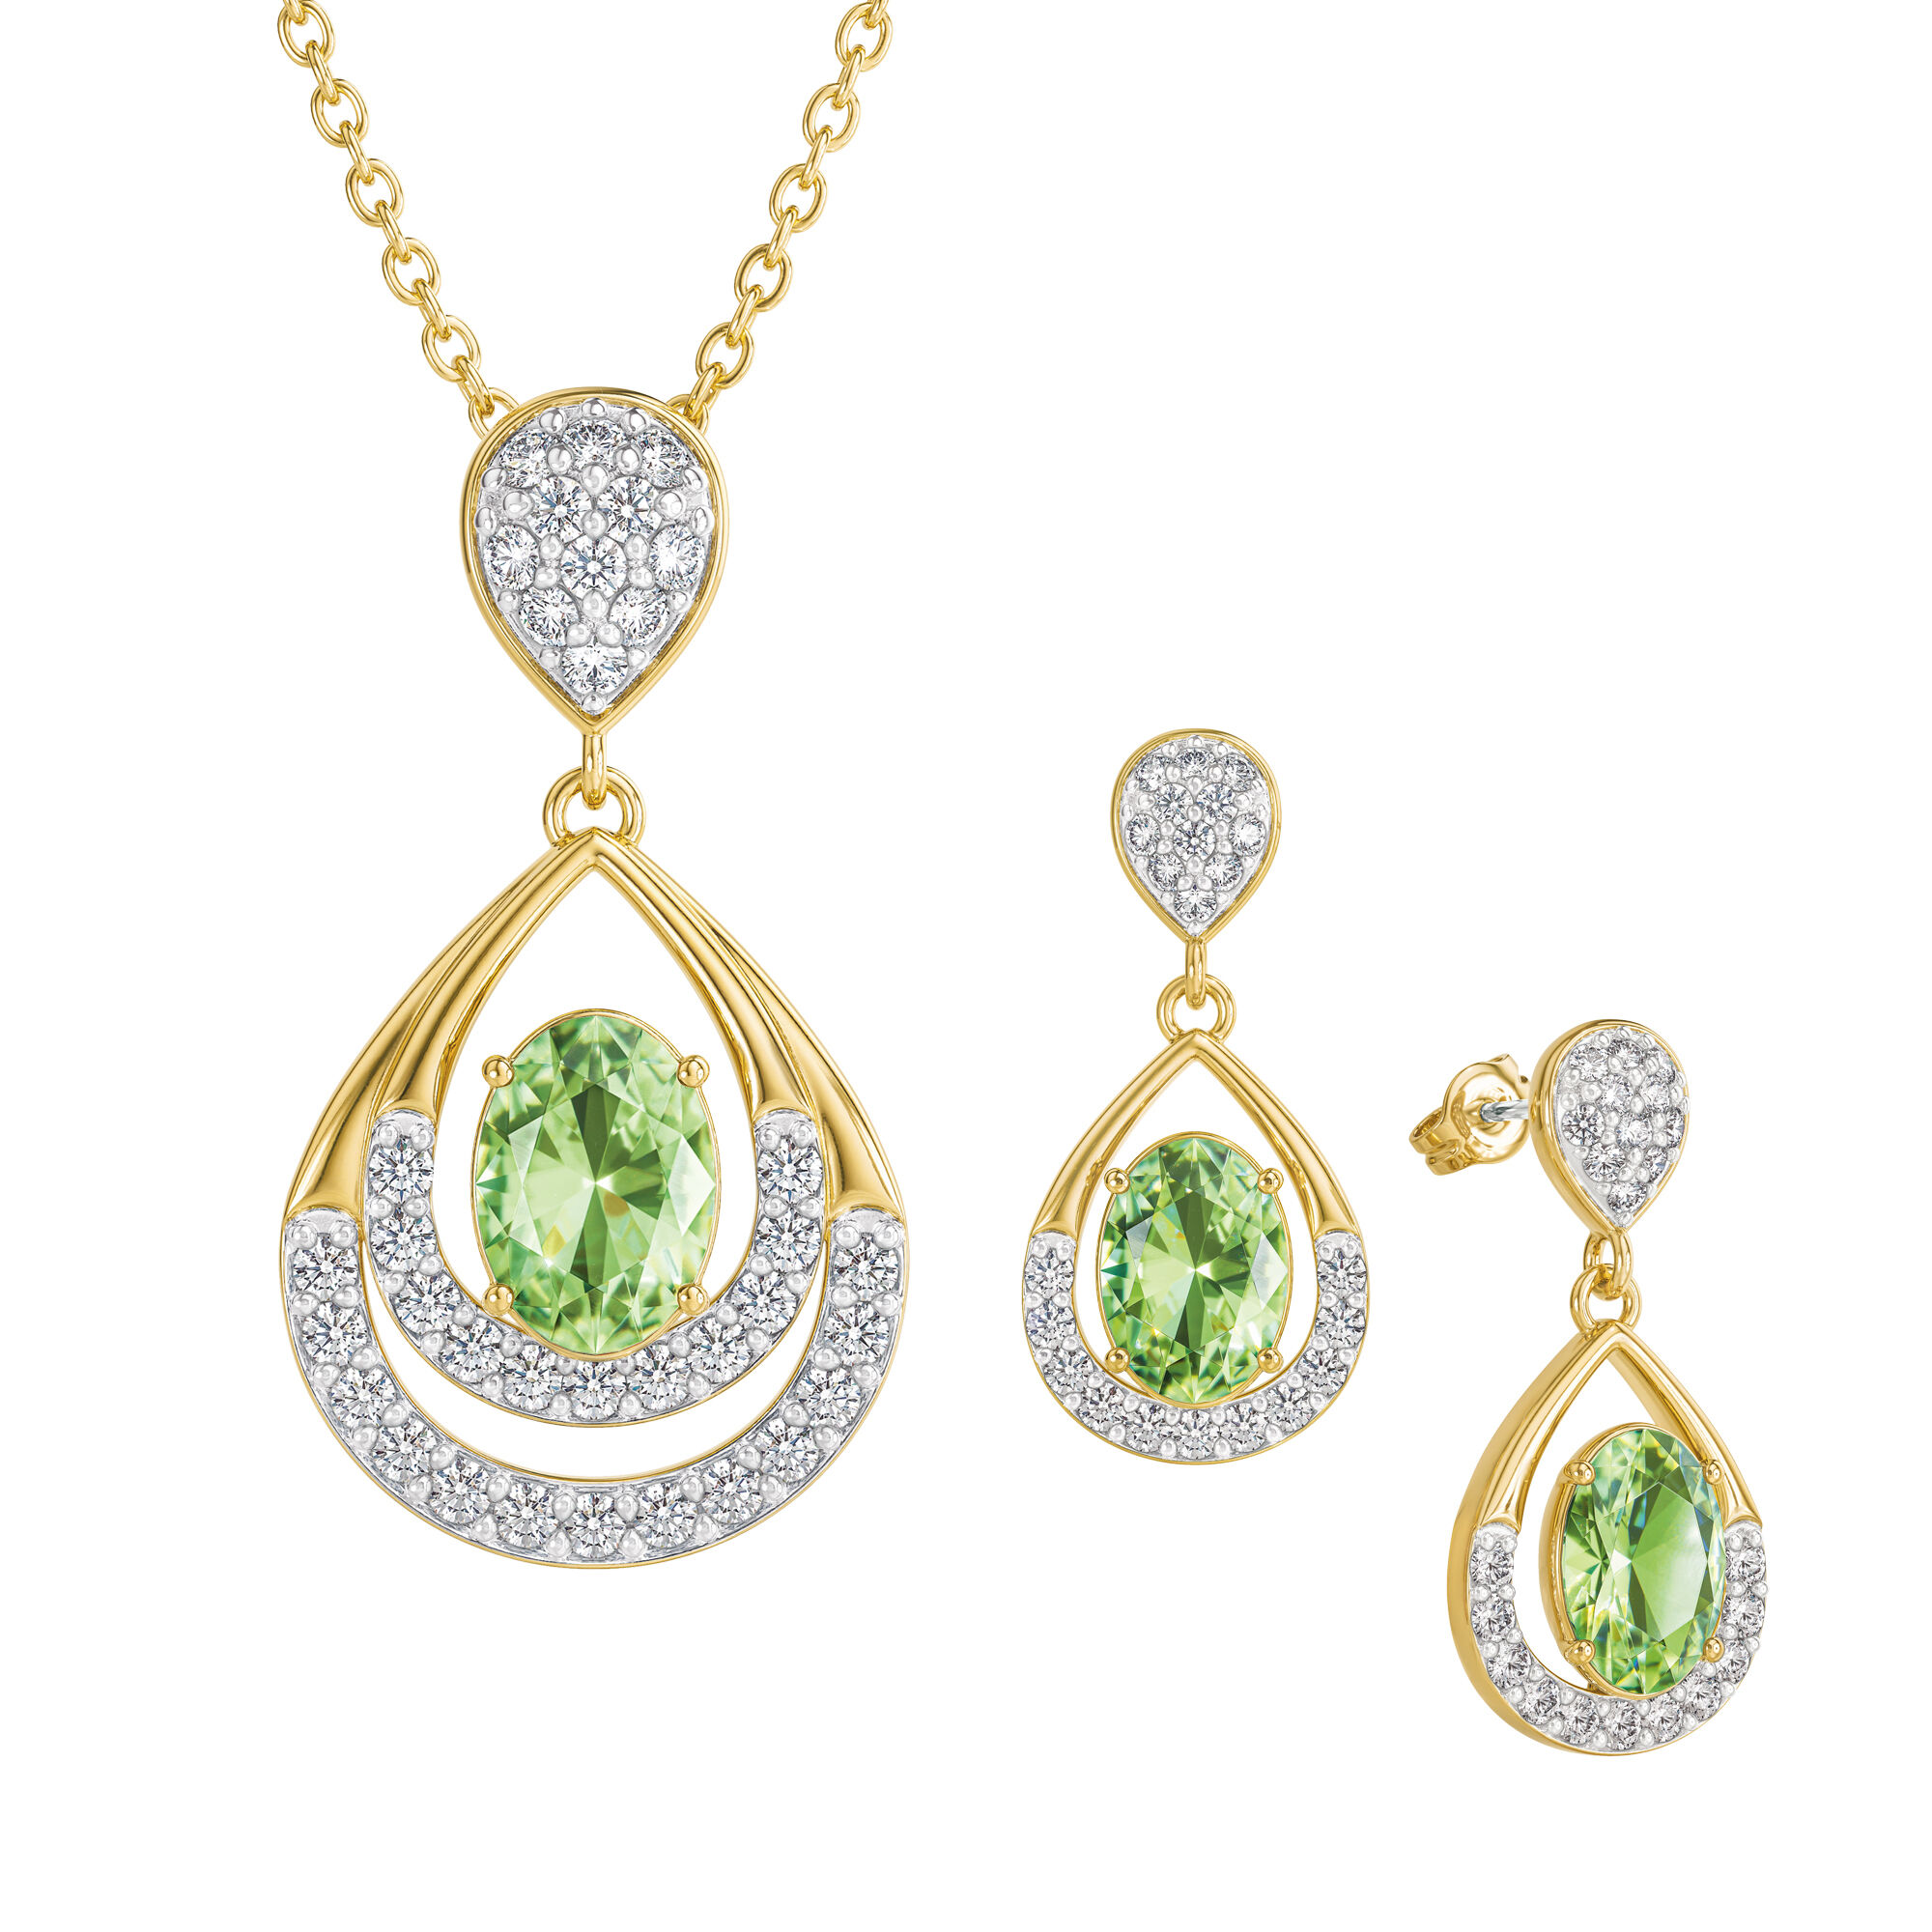 Birthstone Necklace Earring Set 6930 0010 h august